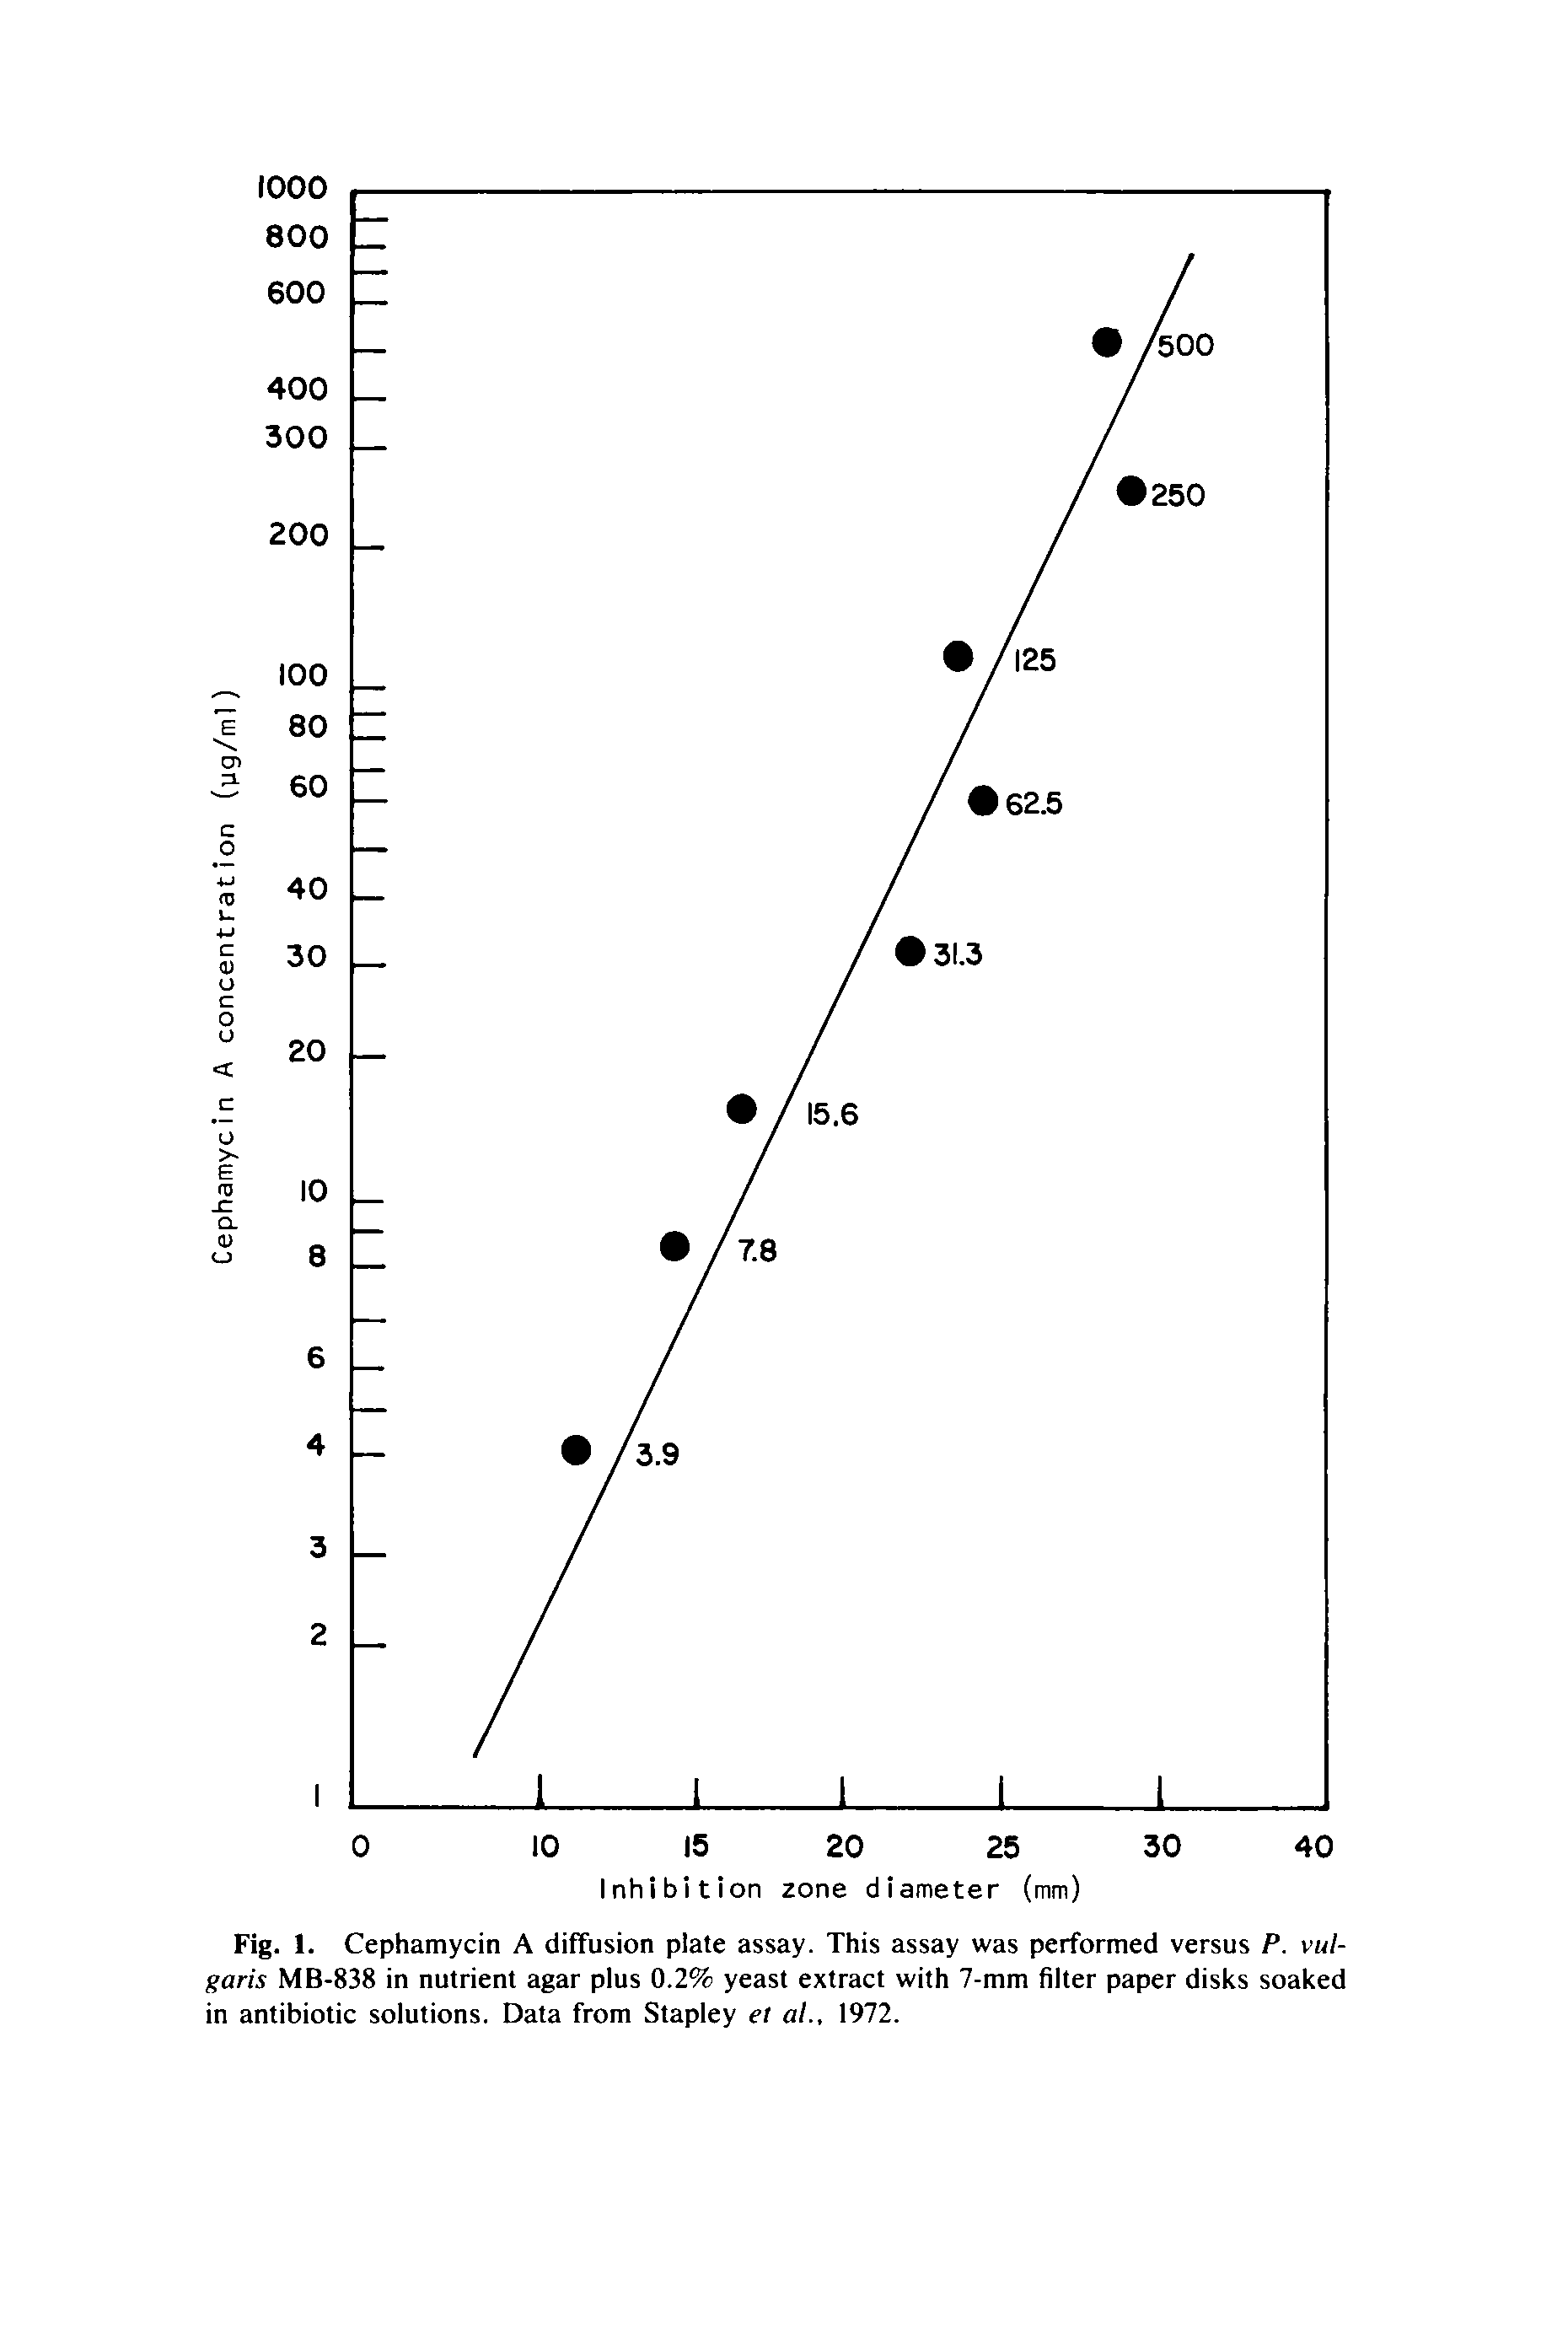 Fig. 1. Cephamycin A diffusion plate assay. This assay was performed versus P. vulgaris MB-838 in nutrient agar plus 0.2% yeast extract with 7-mm filter paper disks soaked in antibiotic solutions. Data from Stapley et al., 1972.